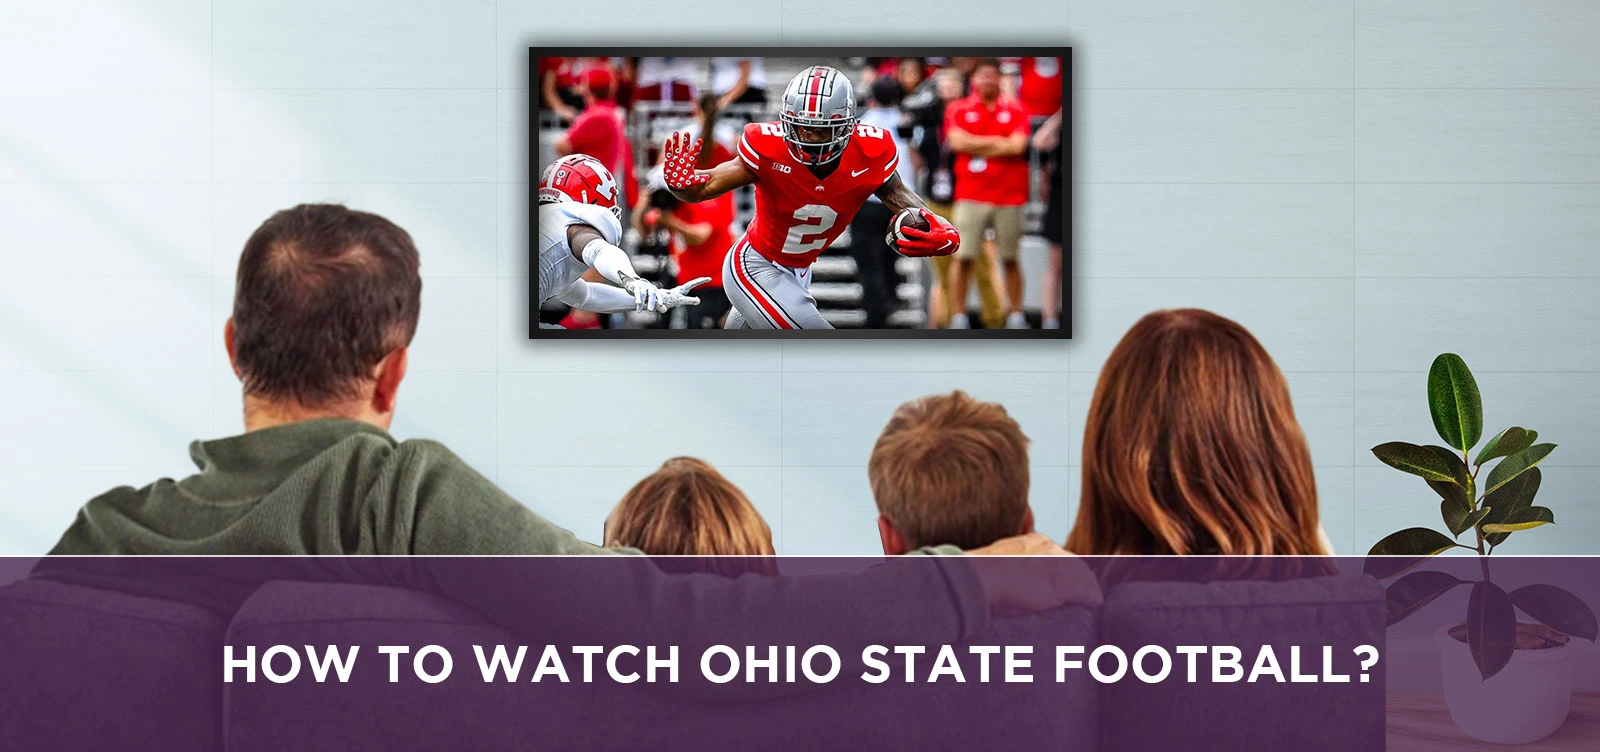 How To Watch Ohio State Football?